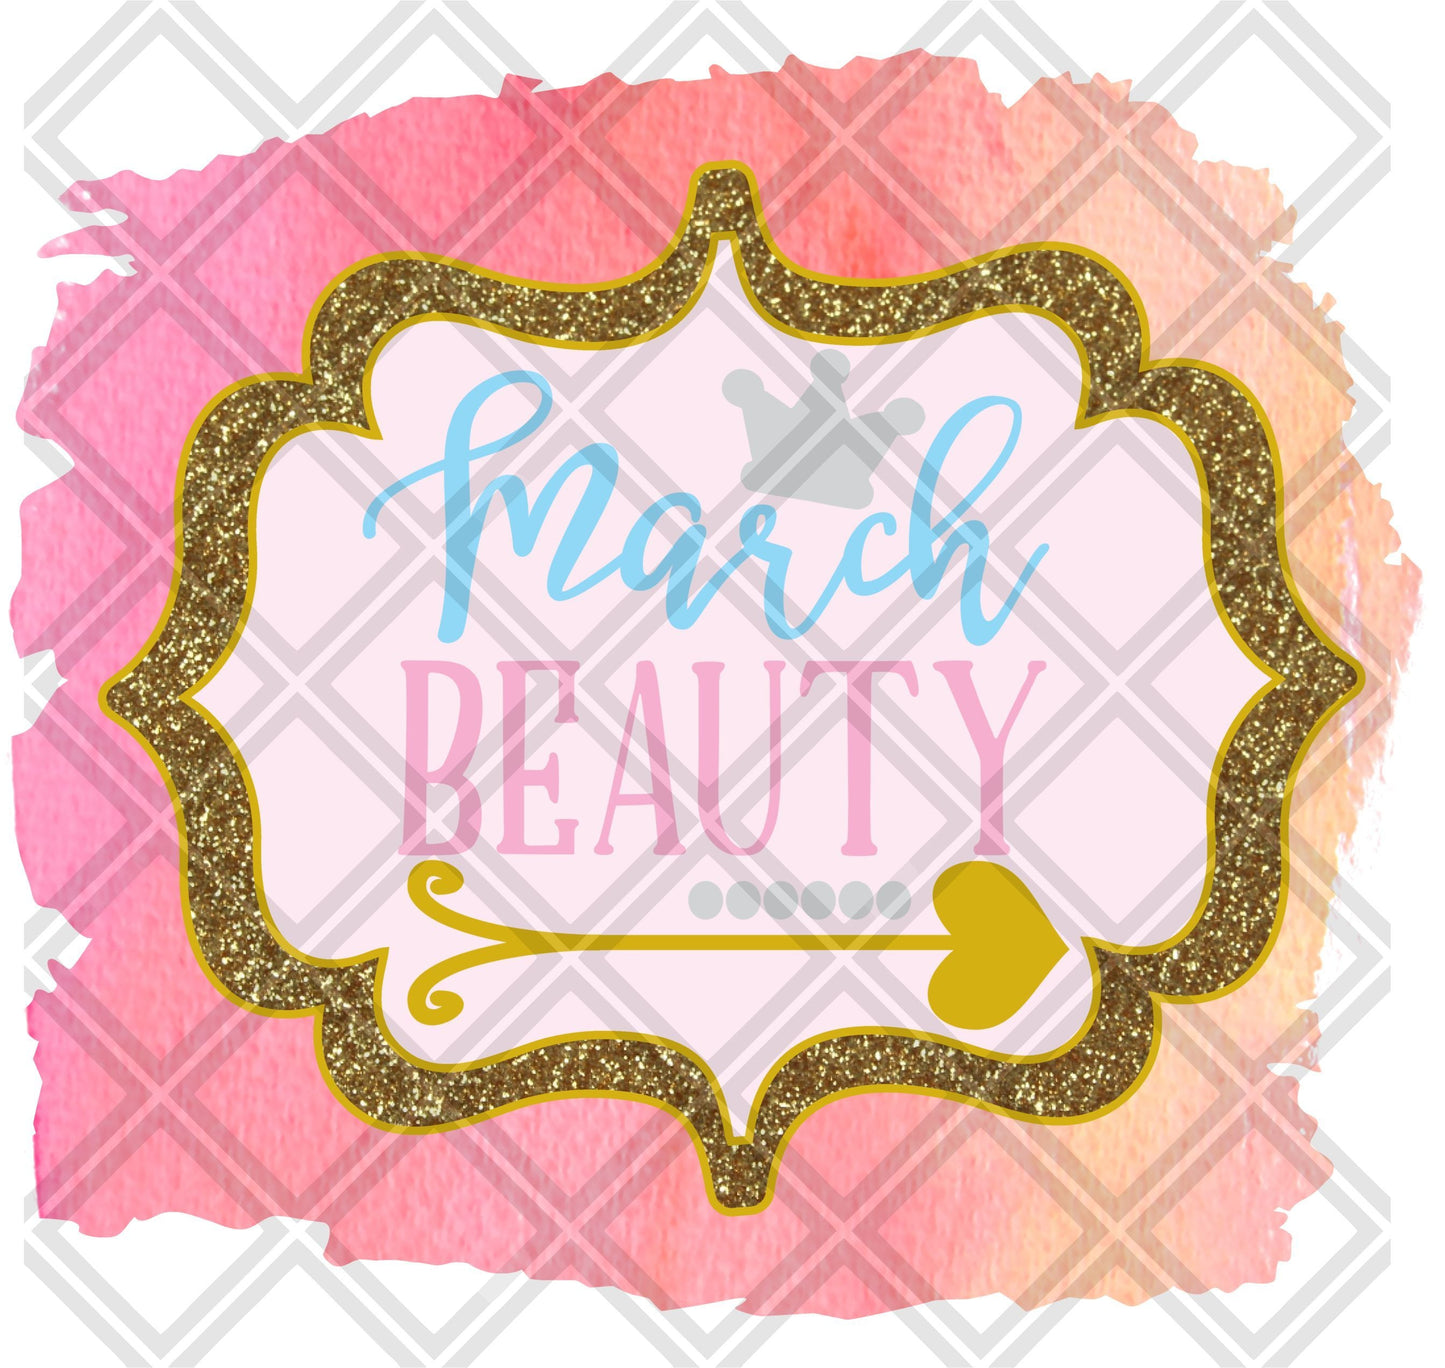 March Beauty Month DTF TRANSFERPRINT TO ORDER